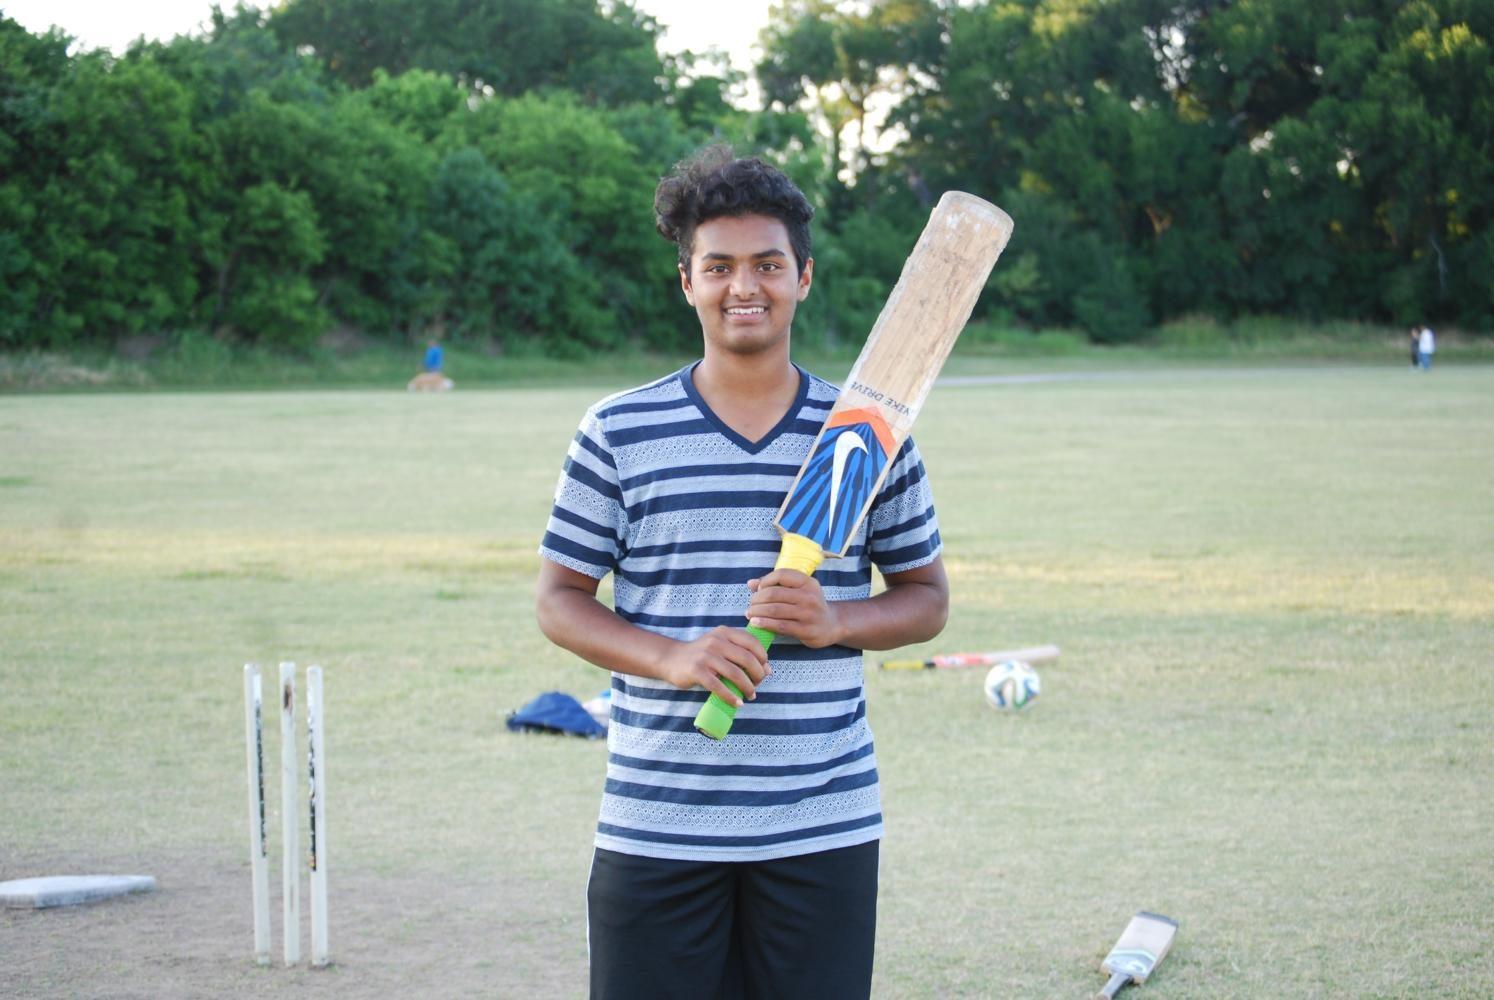 Coppell+High+School+senior+Karthik+Gattepalli+plays+for+the+USA+Under19+team.+He+plays+an+all-rounder%2C+which+means+he+bats%2C+bowls+%28pitches%29+and+fields+%28catches%29+every+game.+%0A